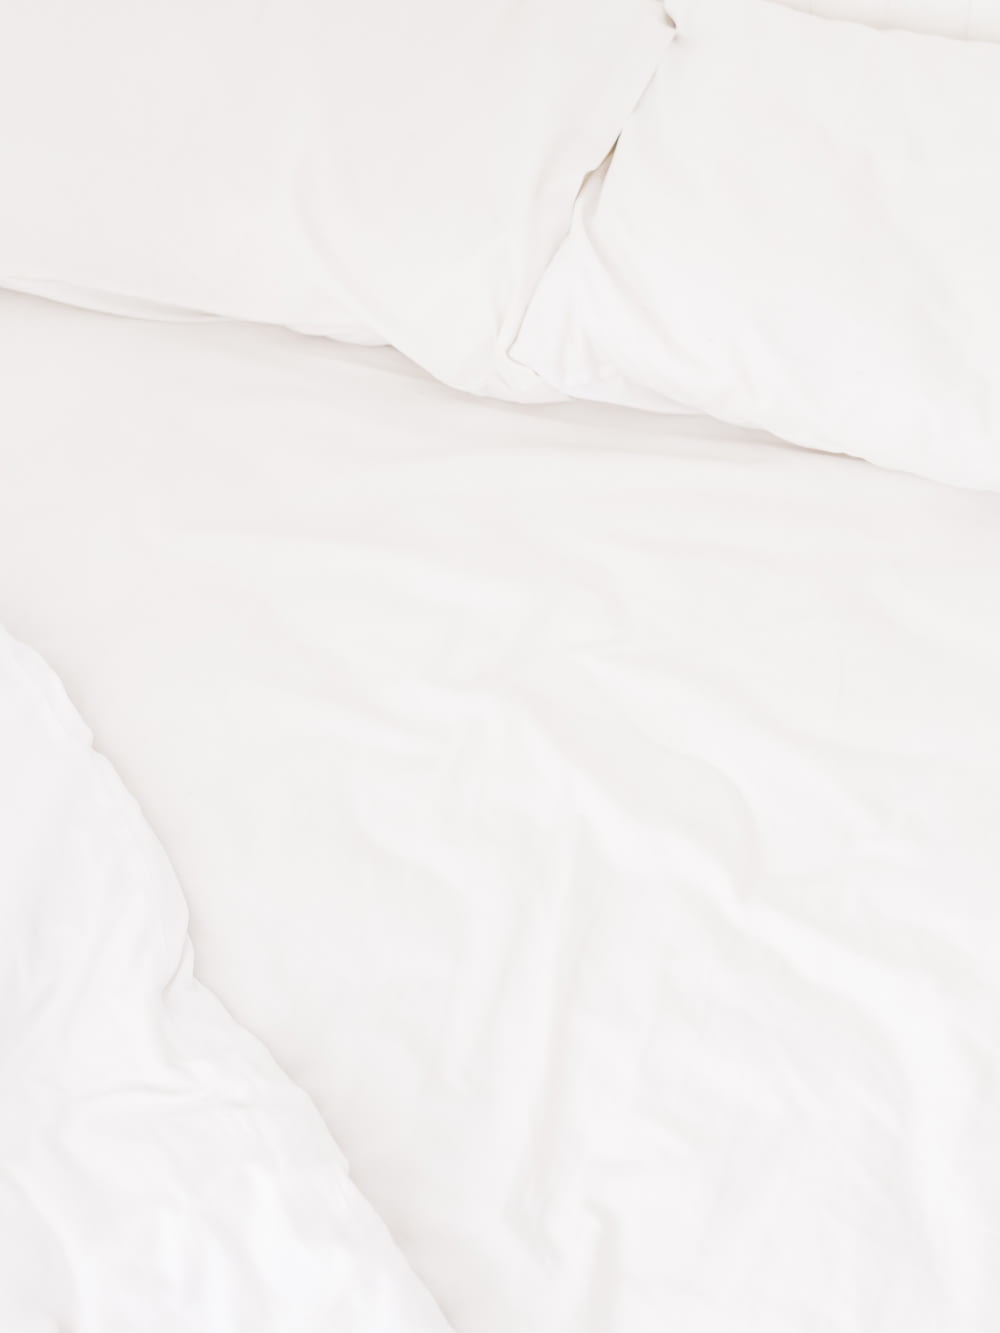 a close up of a bed with white sheets and pillows